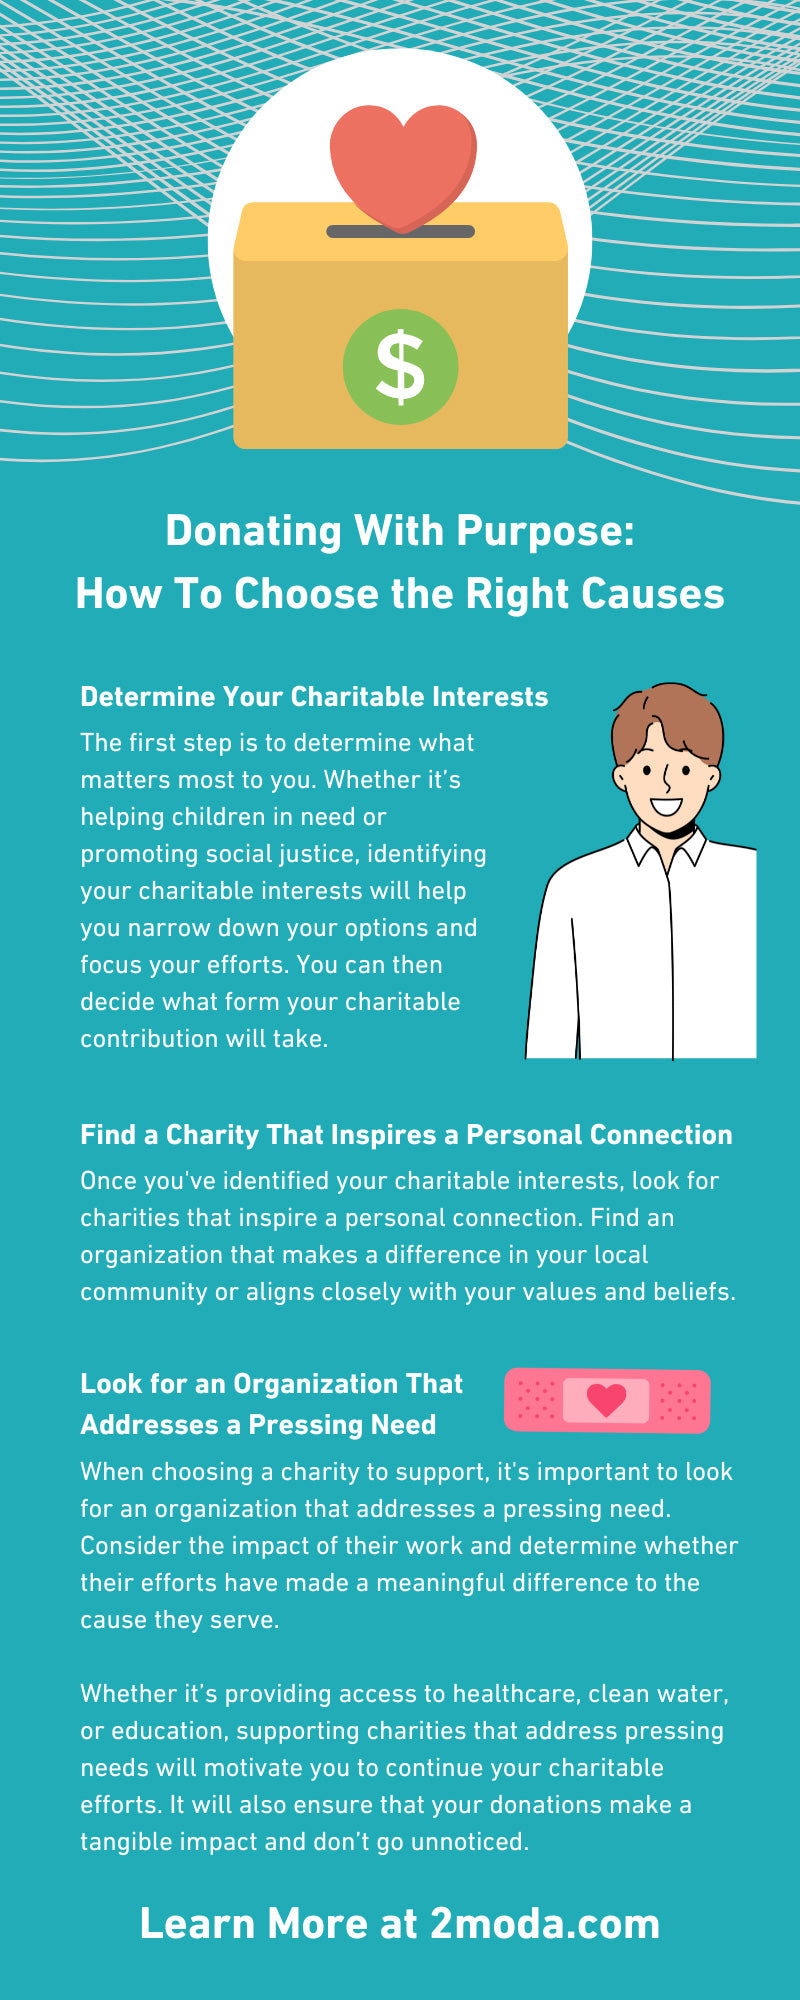 Donating With Purpose: How To Choose the Right Causes